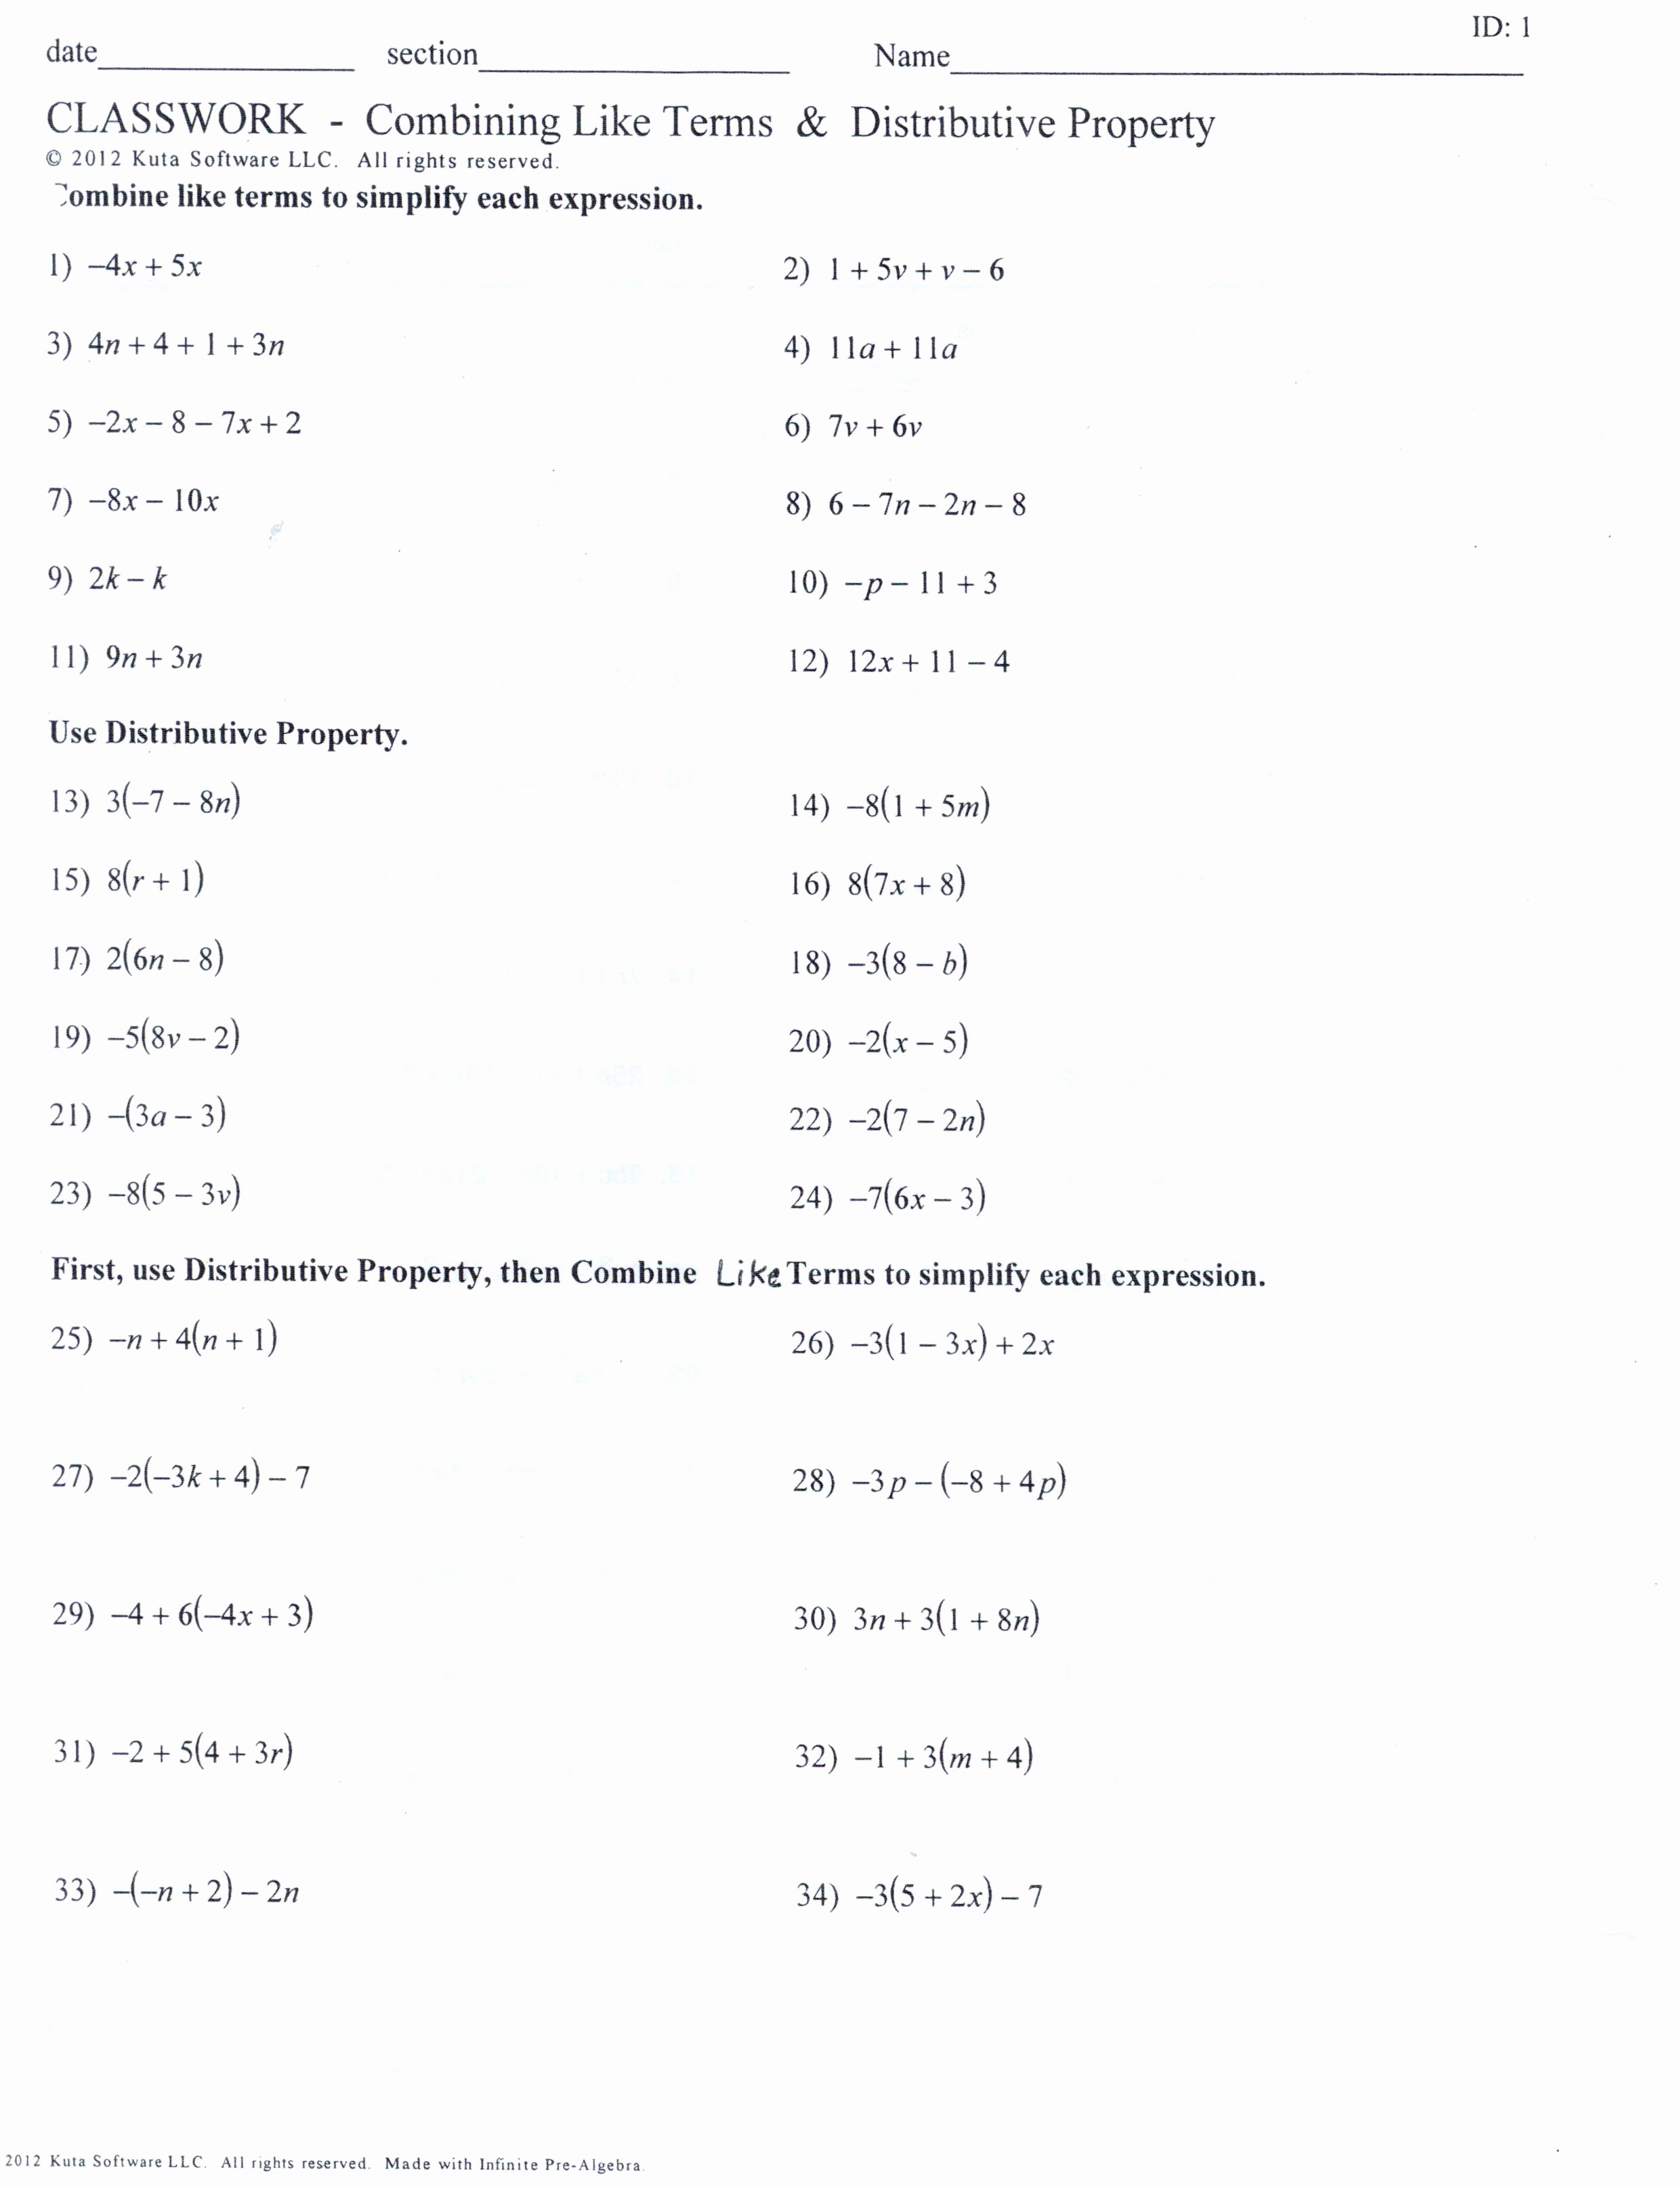 50 Combining Like Terms Worksheet Answers